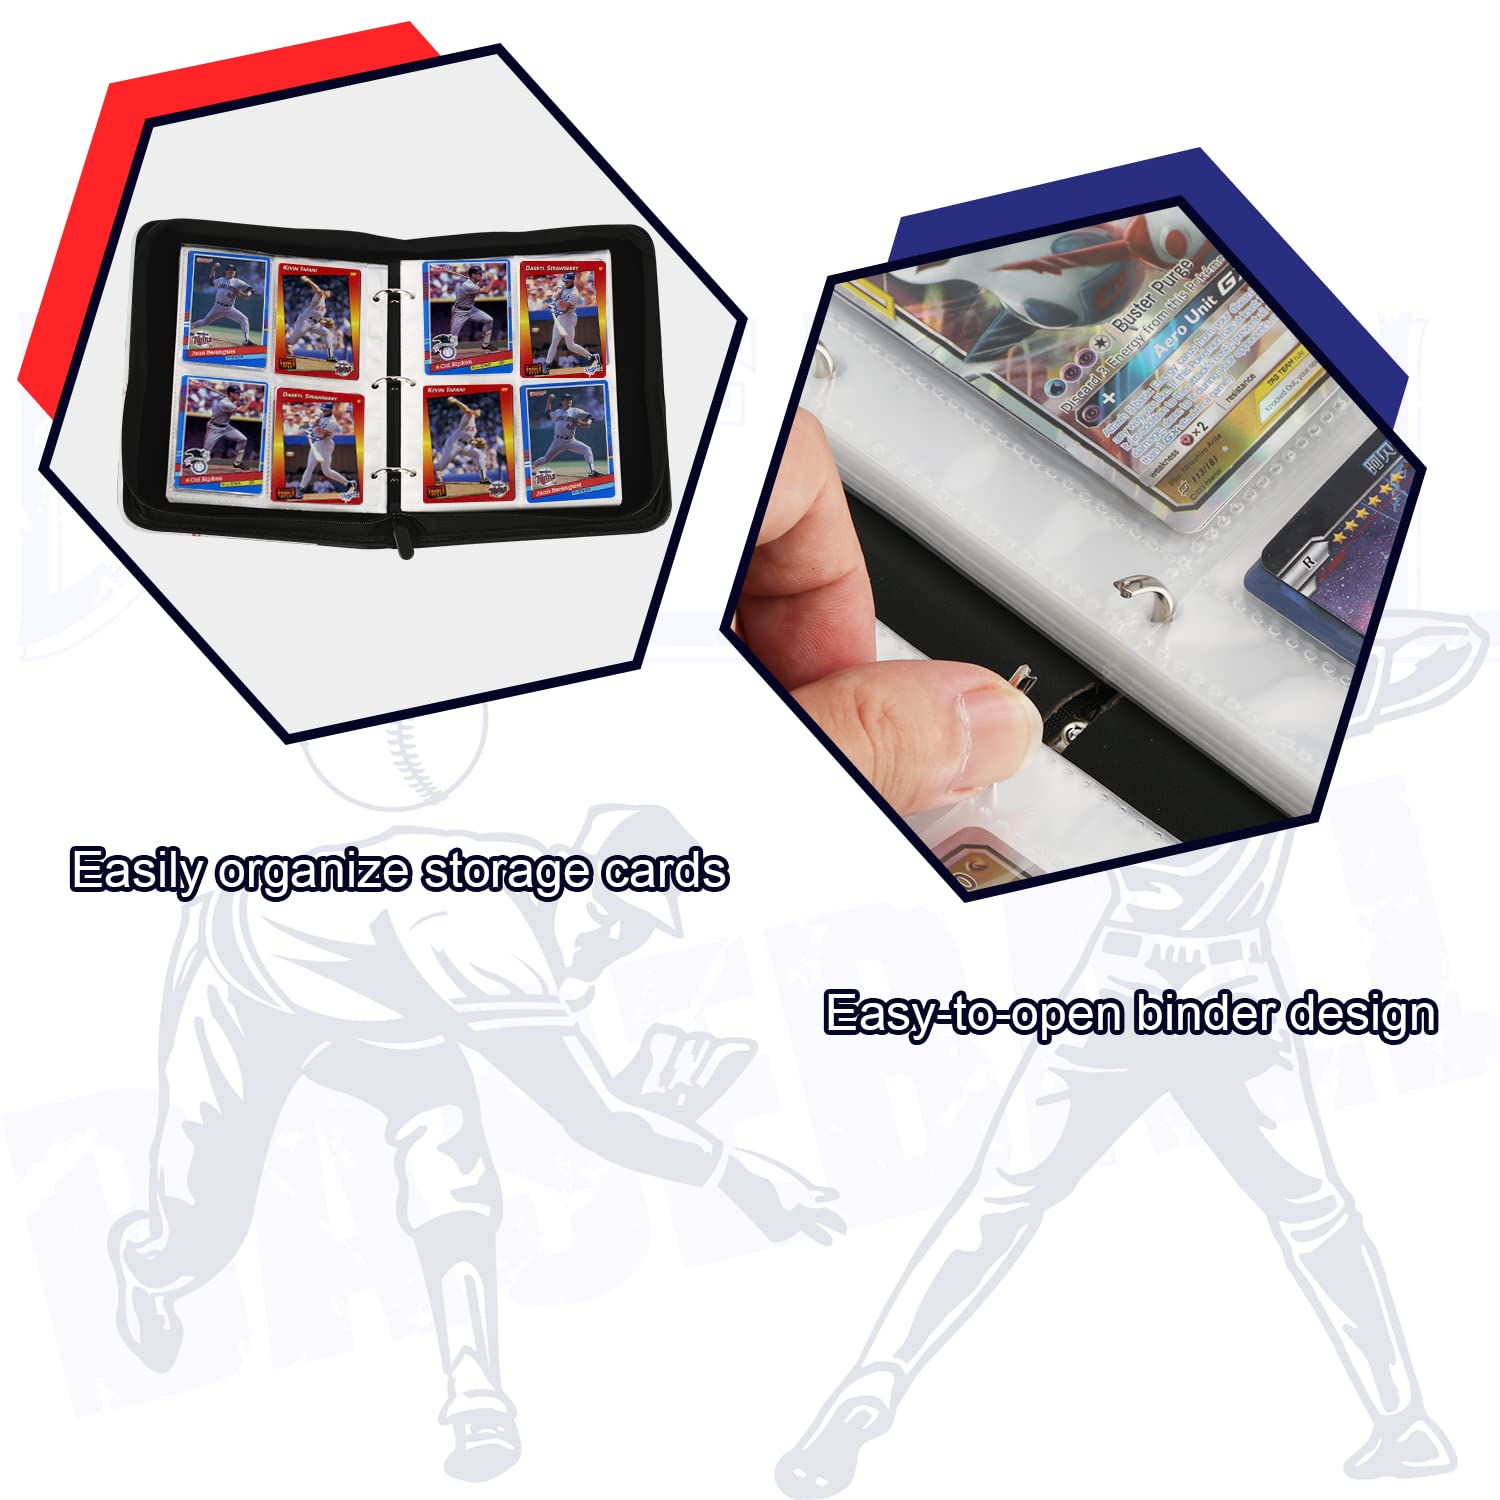 cEcOKESO Card Binder 4 Pocket, Fits 400 Cards with 50 Removable Sleevesves,Trading Card Binder with Sleeves, Baseball Card Binder, Sports